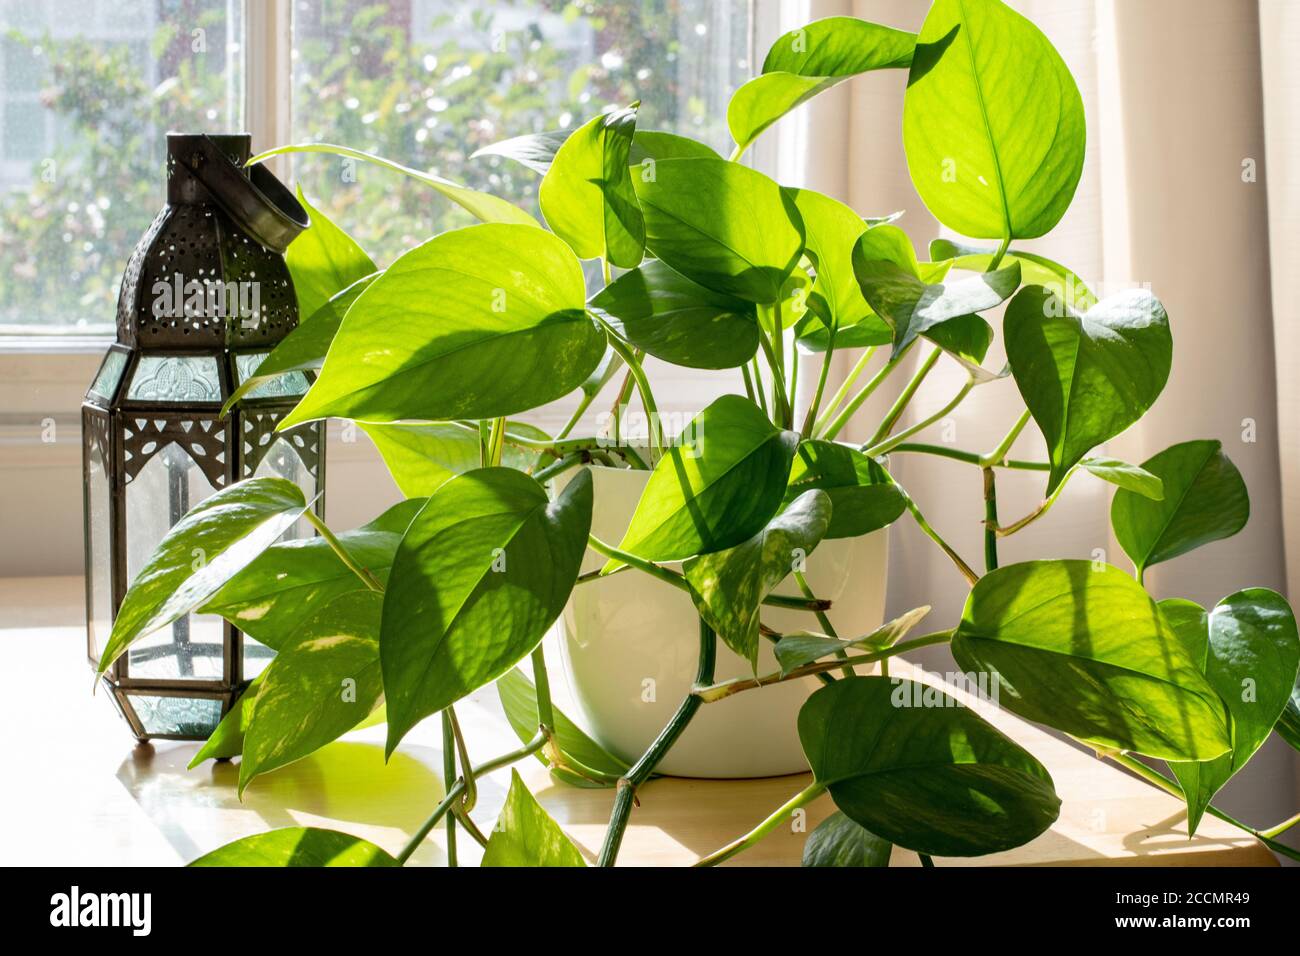 Devils Ivy houseplant next to a lantern and a window in a beautifully designed home interior. Stock Photo